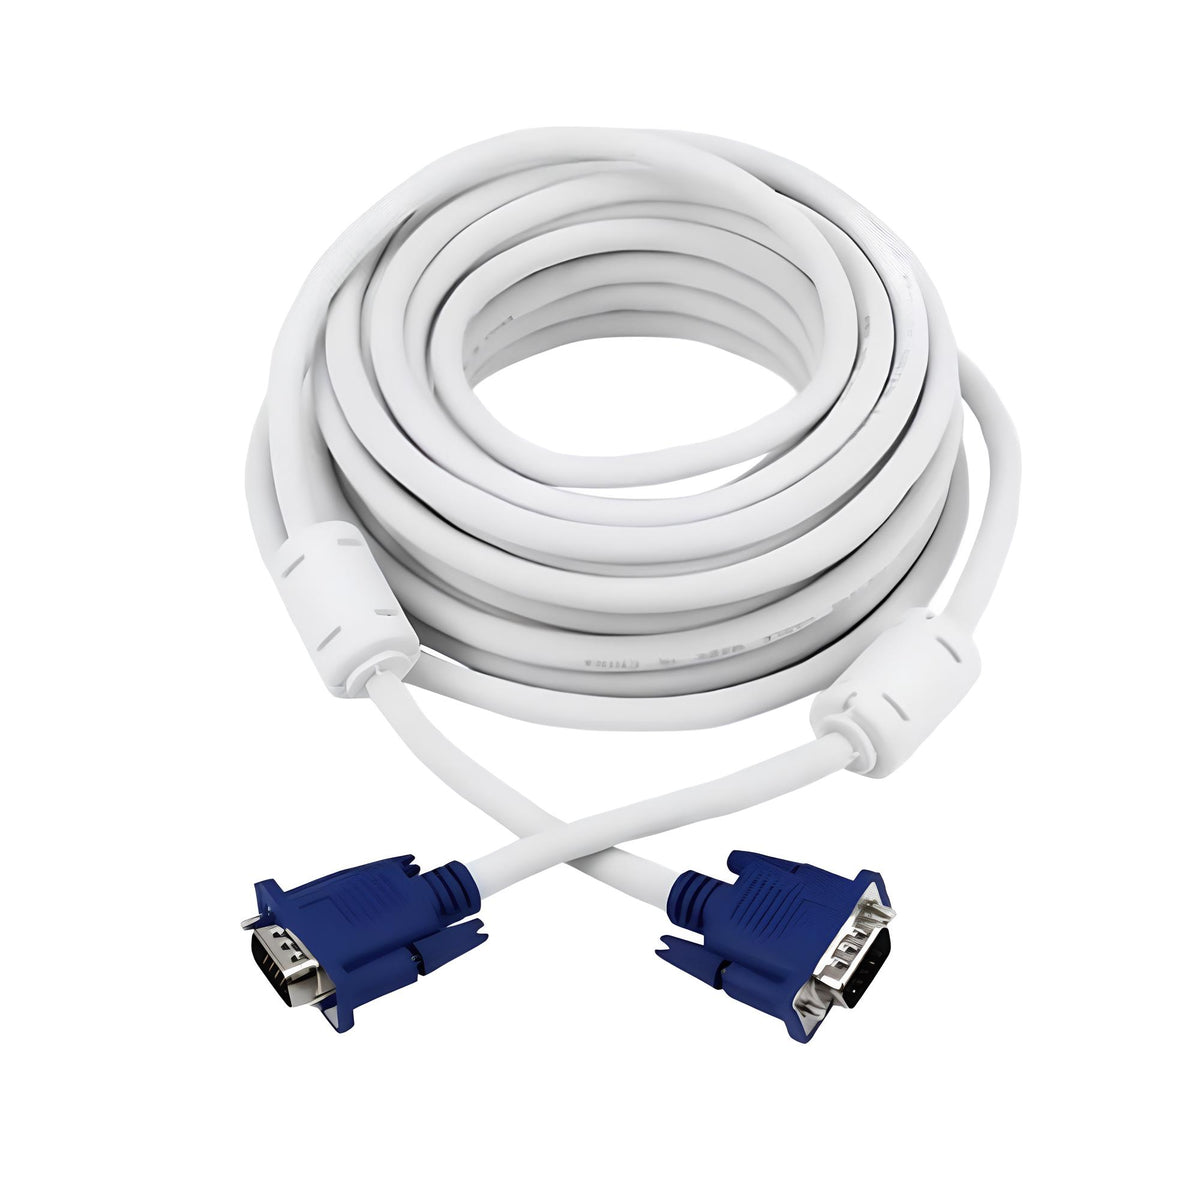 VGA High-Speed Cable 2m Length crystal cable for PC / projector (Male to Male VGA cable White)